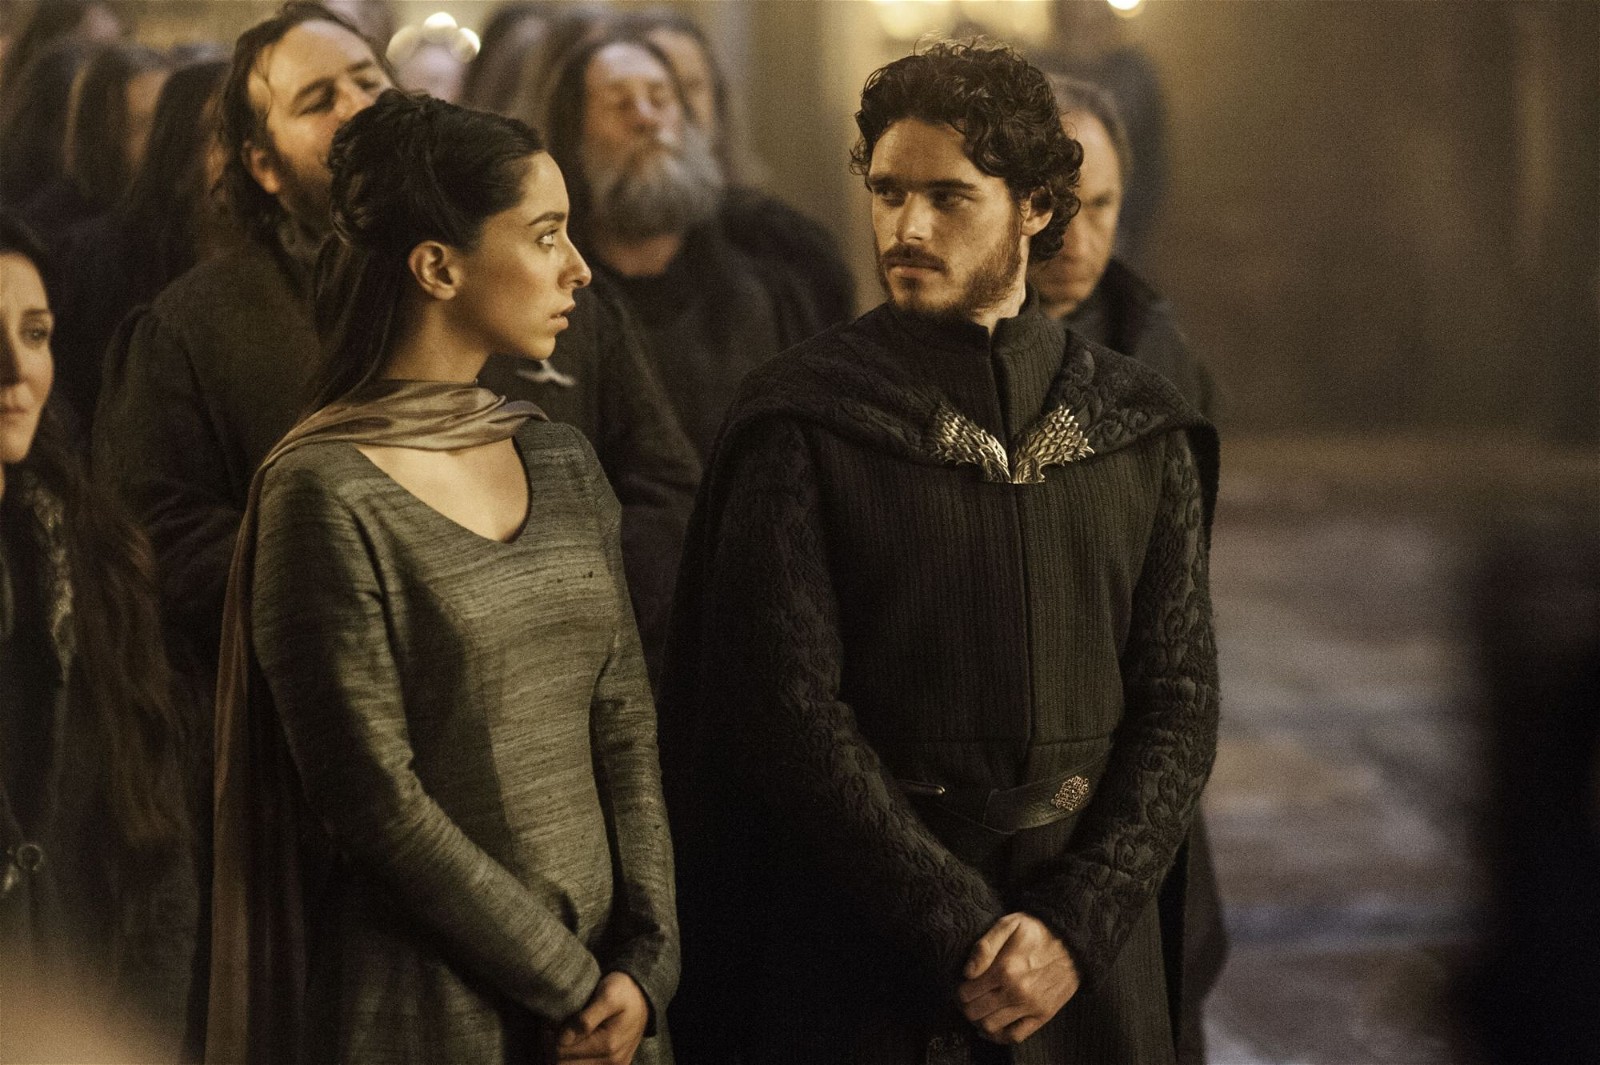 Talisa Stark and Robb Stark were lovers who met a tragic end in season 3 of Game of Thrones | HBO